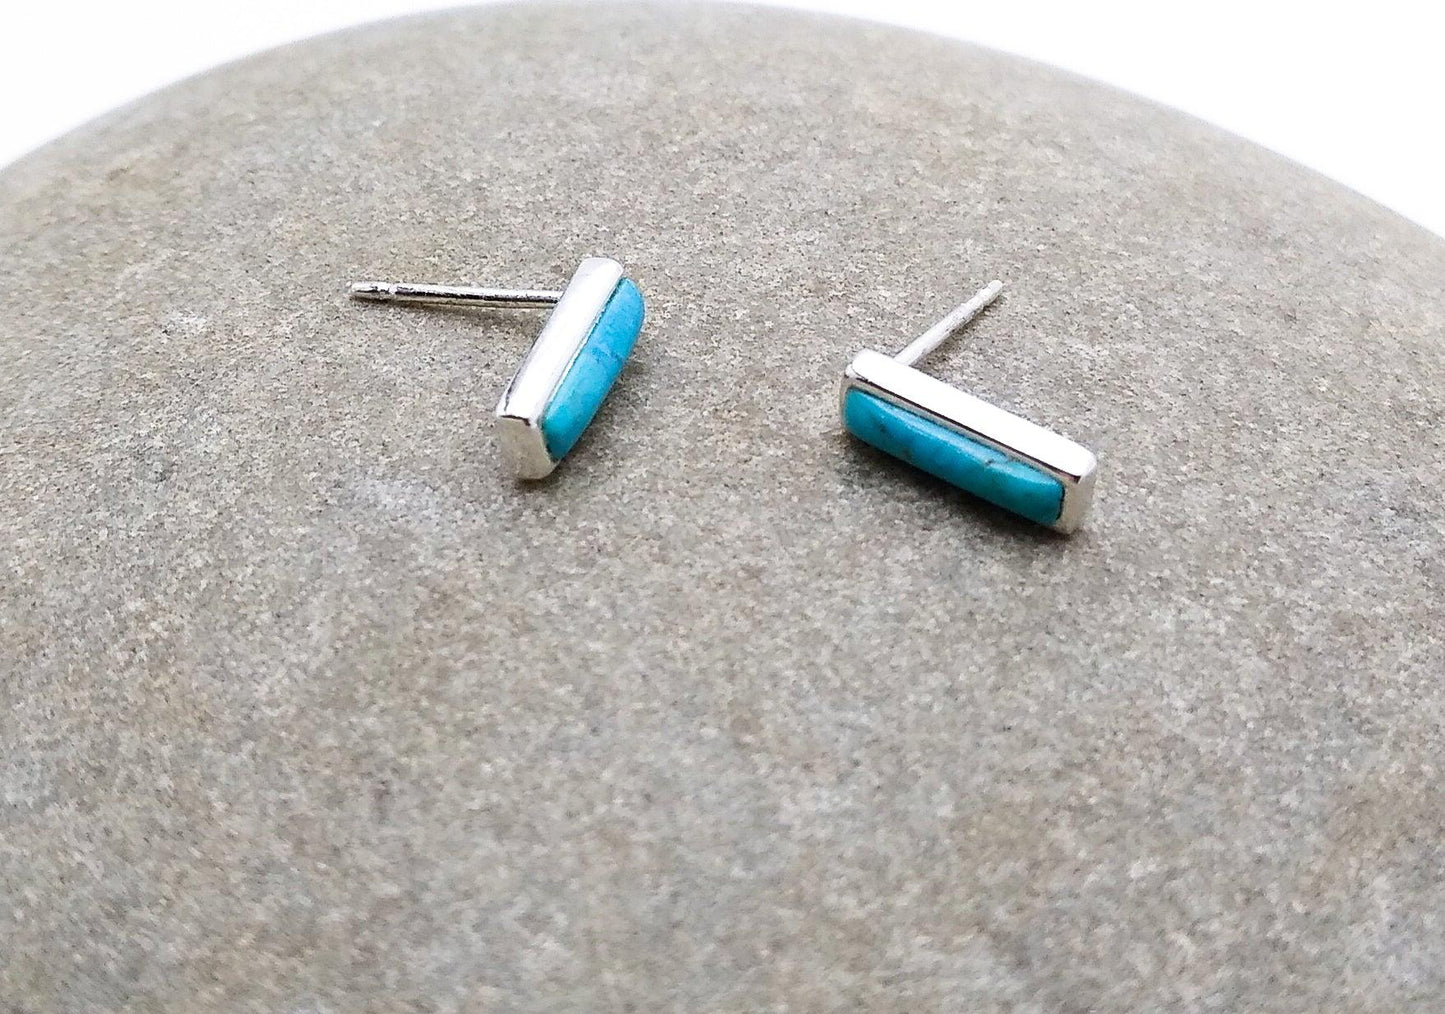 Boma sterling silver bar studs with inlaid blue Turquoise on a simple sterling setting.